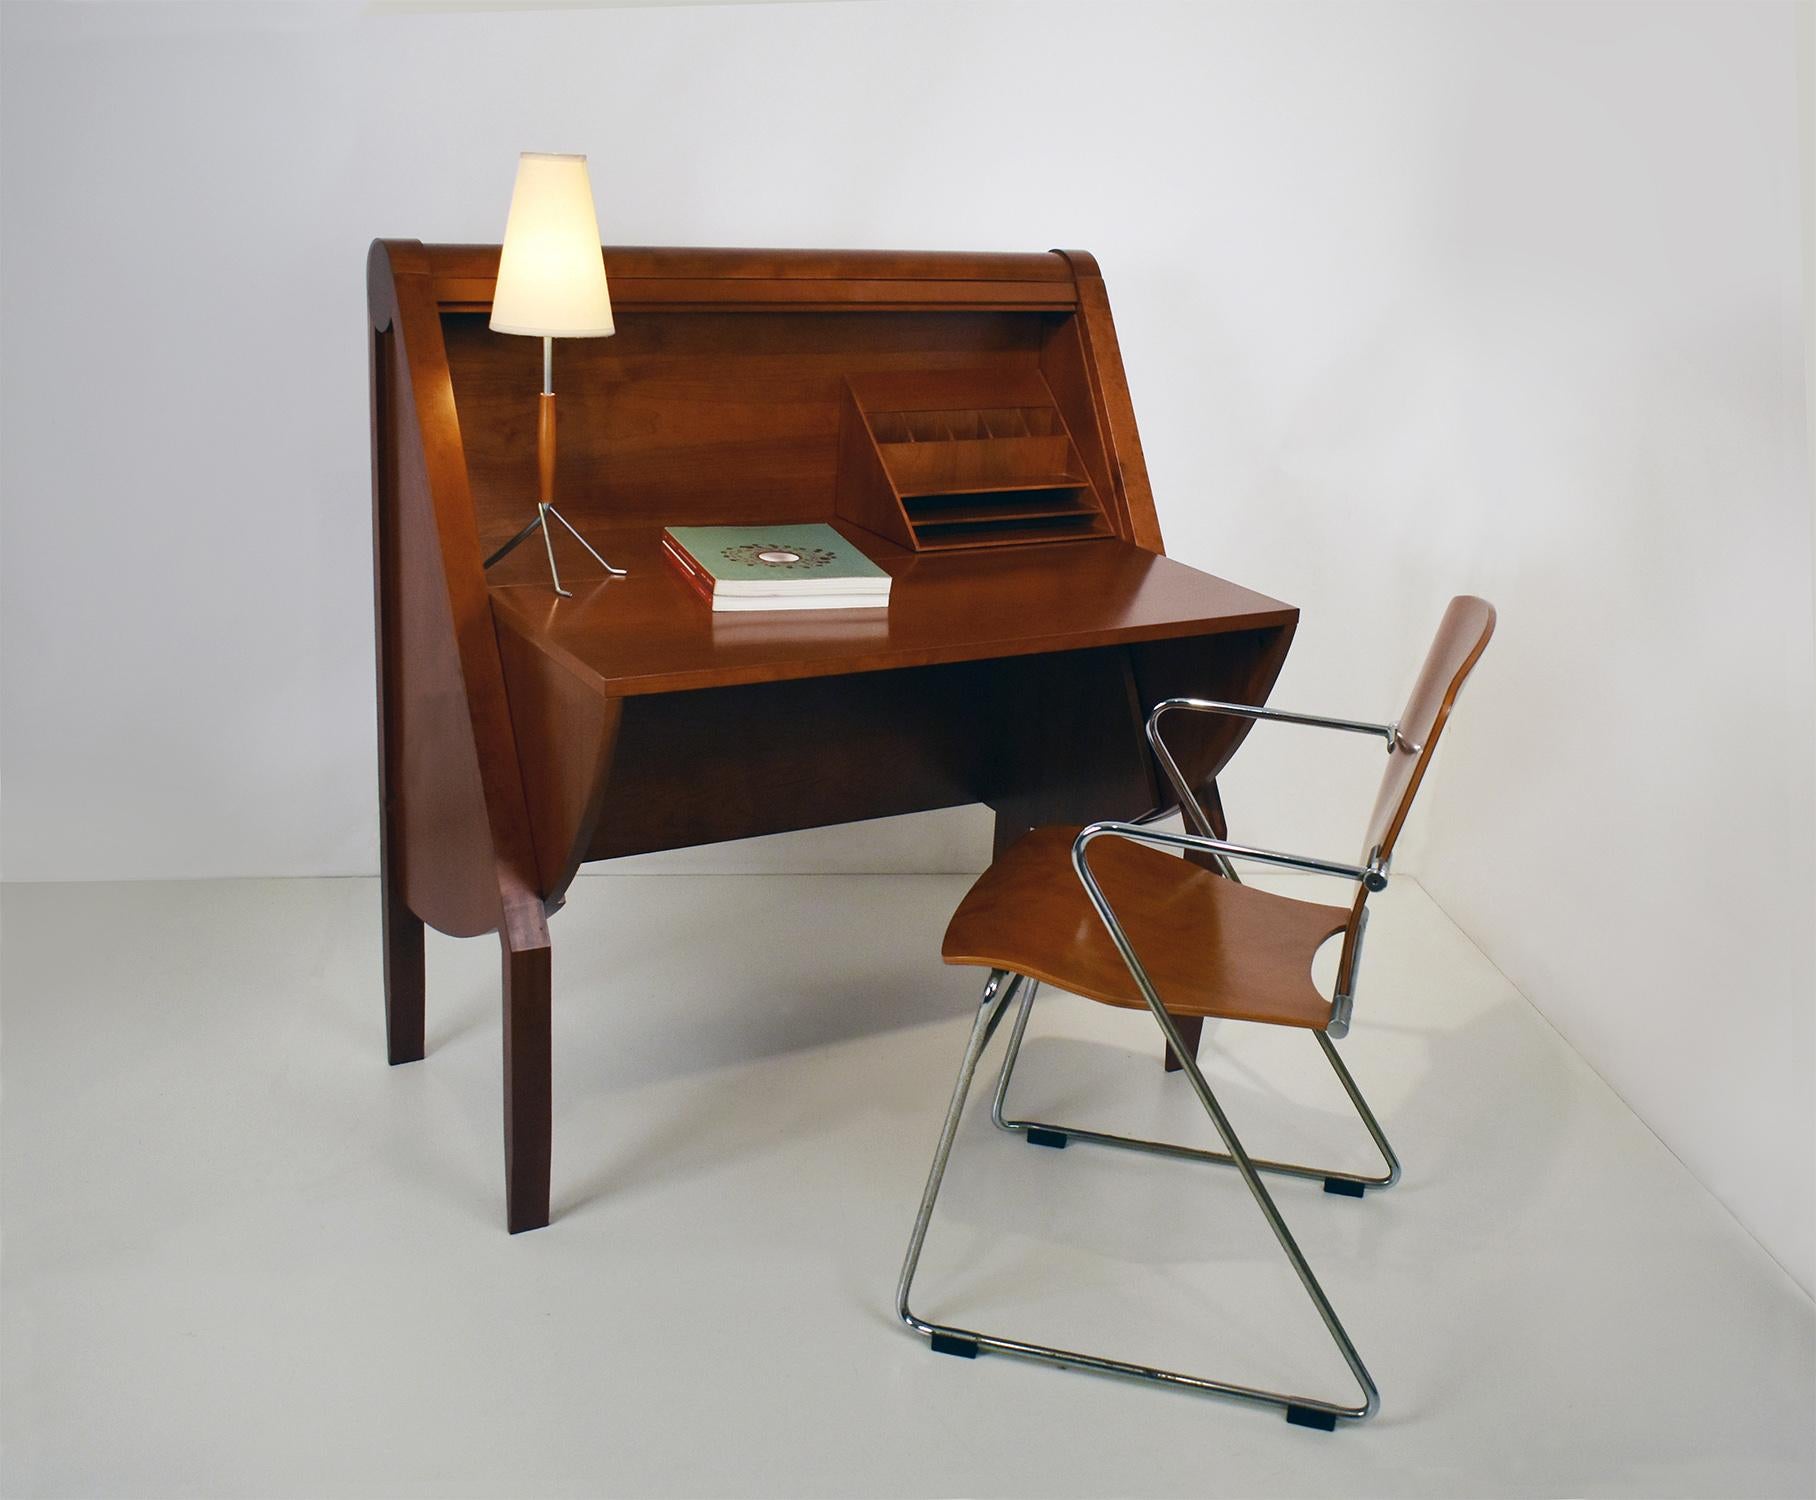 Post-Modern Compass Writing Desk Bureau by Pedro Miralles Claver for Punt Mobles, circa 1990